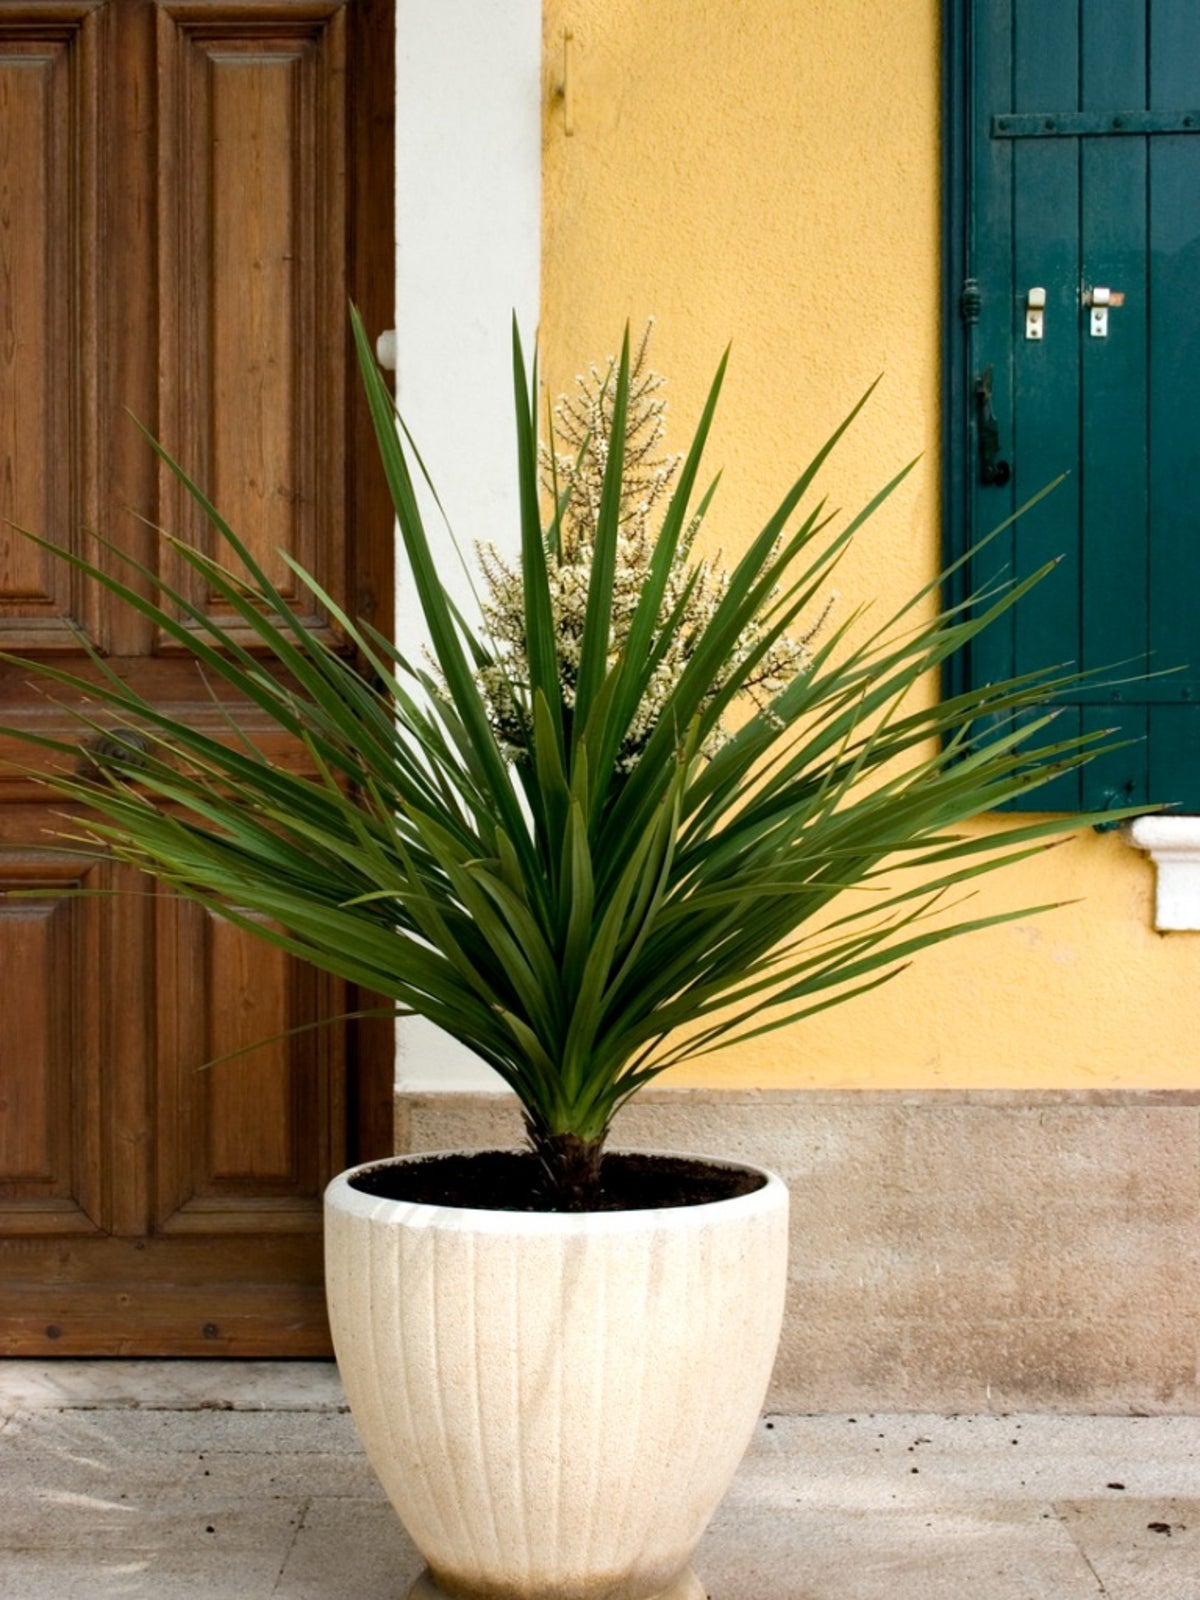 Potted Yucca Plants   How To Care For A Yucca Houseplant